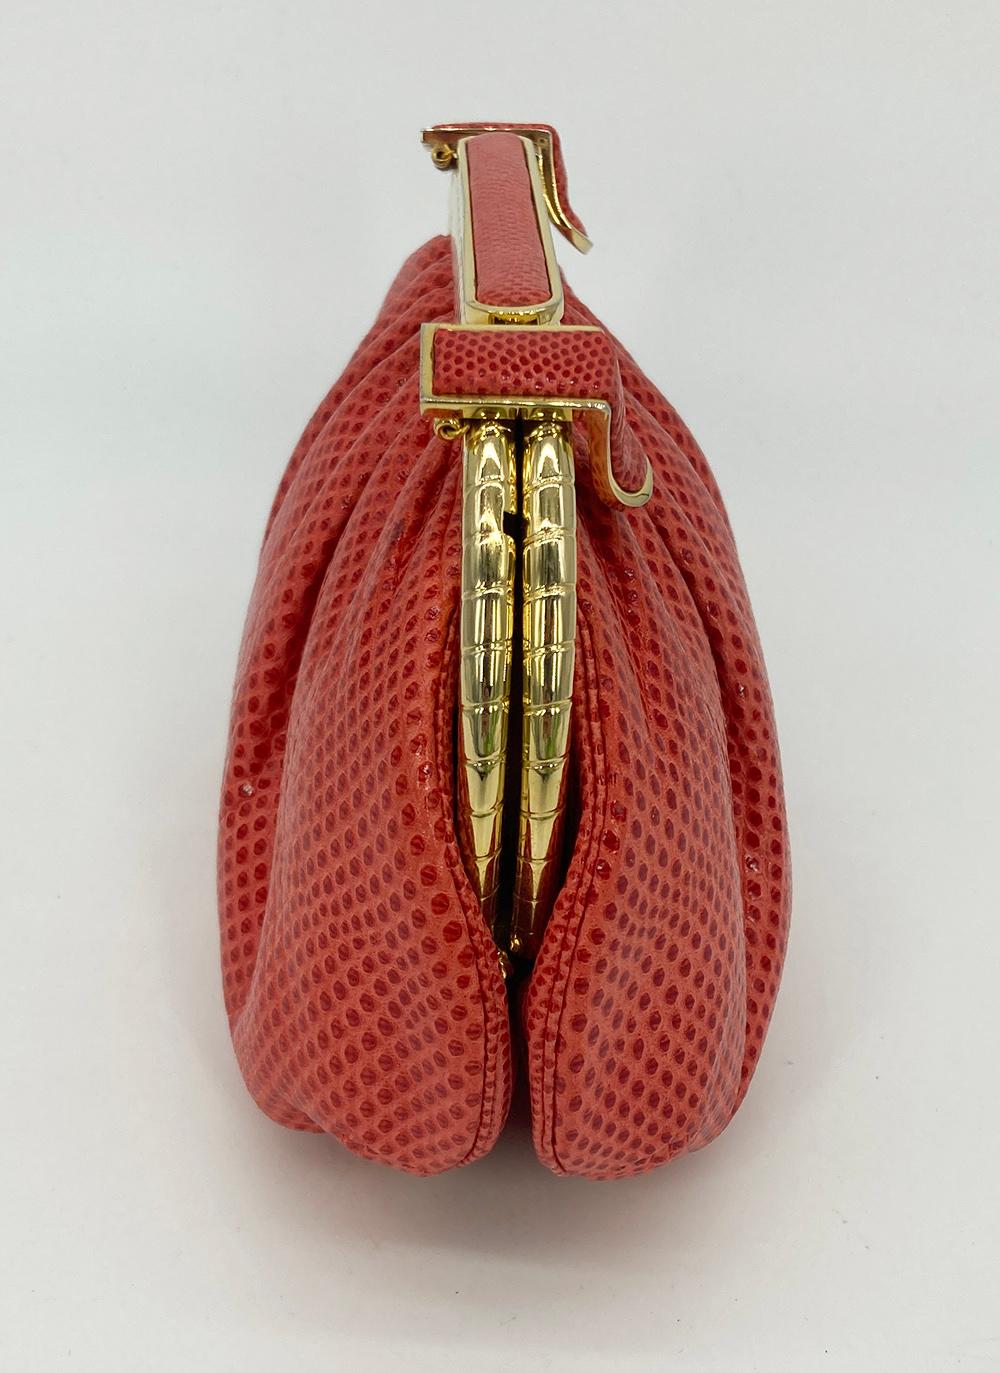 Judith Leiber Red Lizard Clutch in excellent condition. Red lizard leather trimmed with gold hardware. Double latch top closure opens to a red nylon interior with one slit and one zip side pockets. attached matching lizard shoulder strap easily